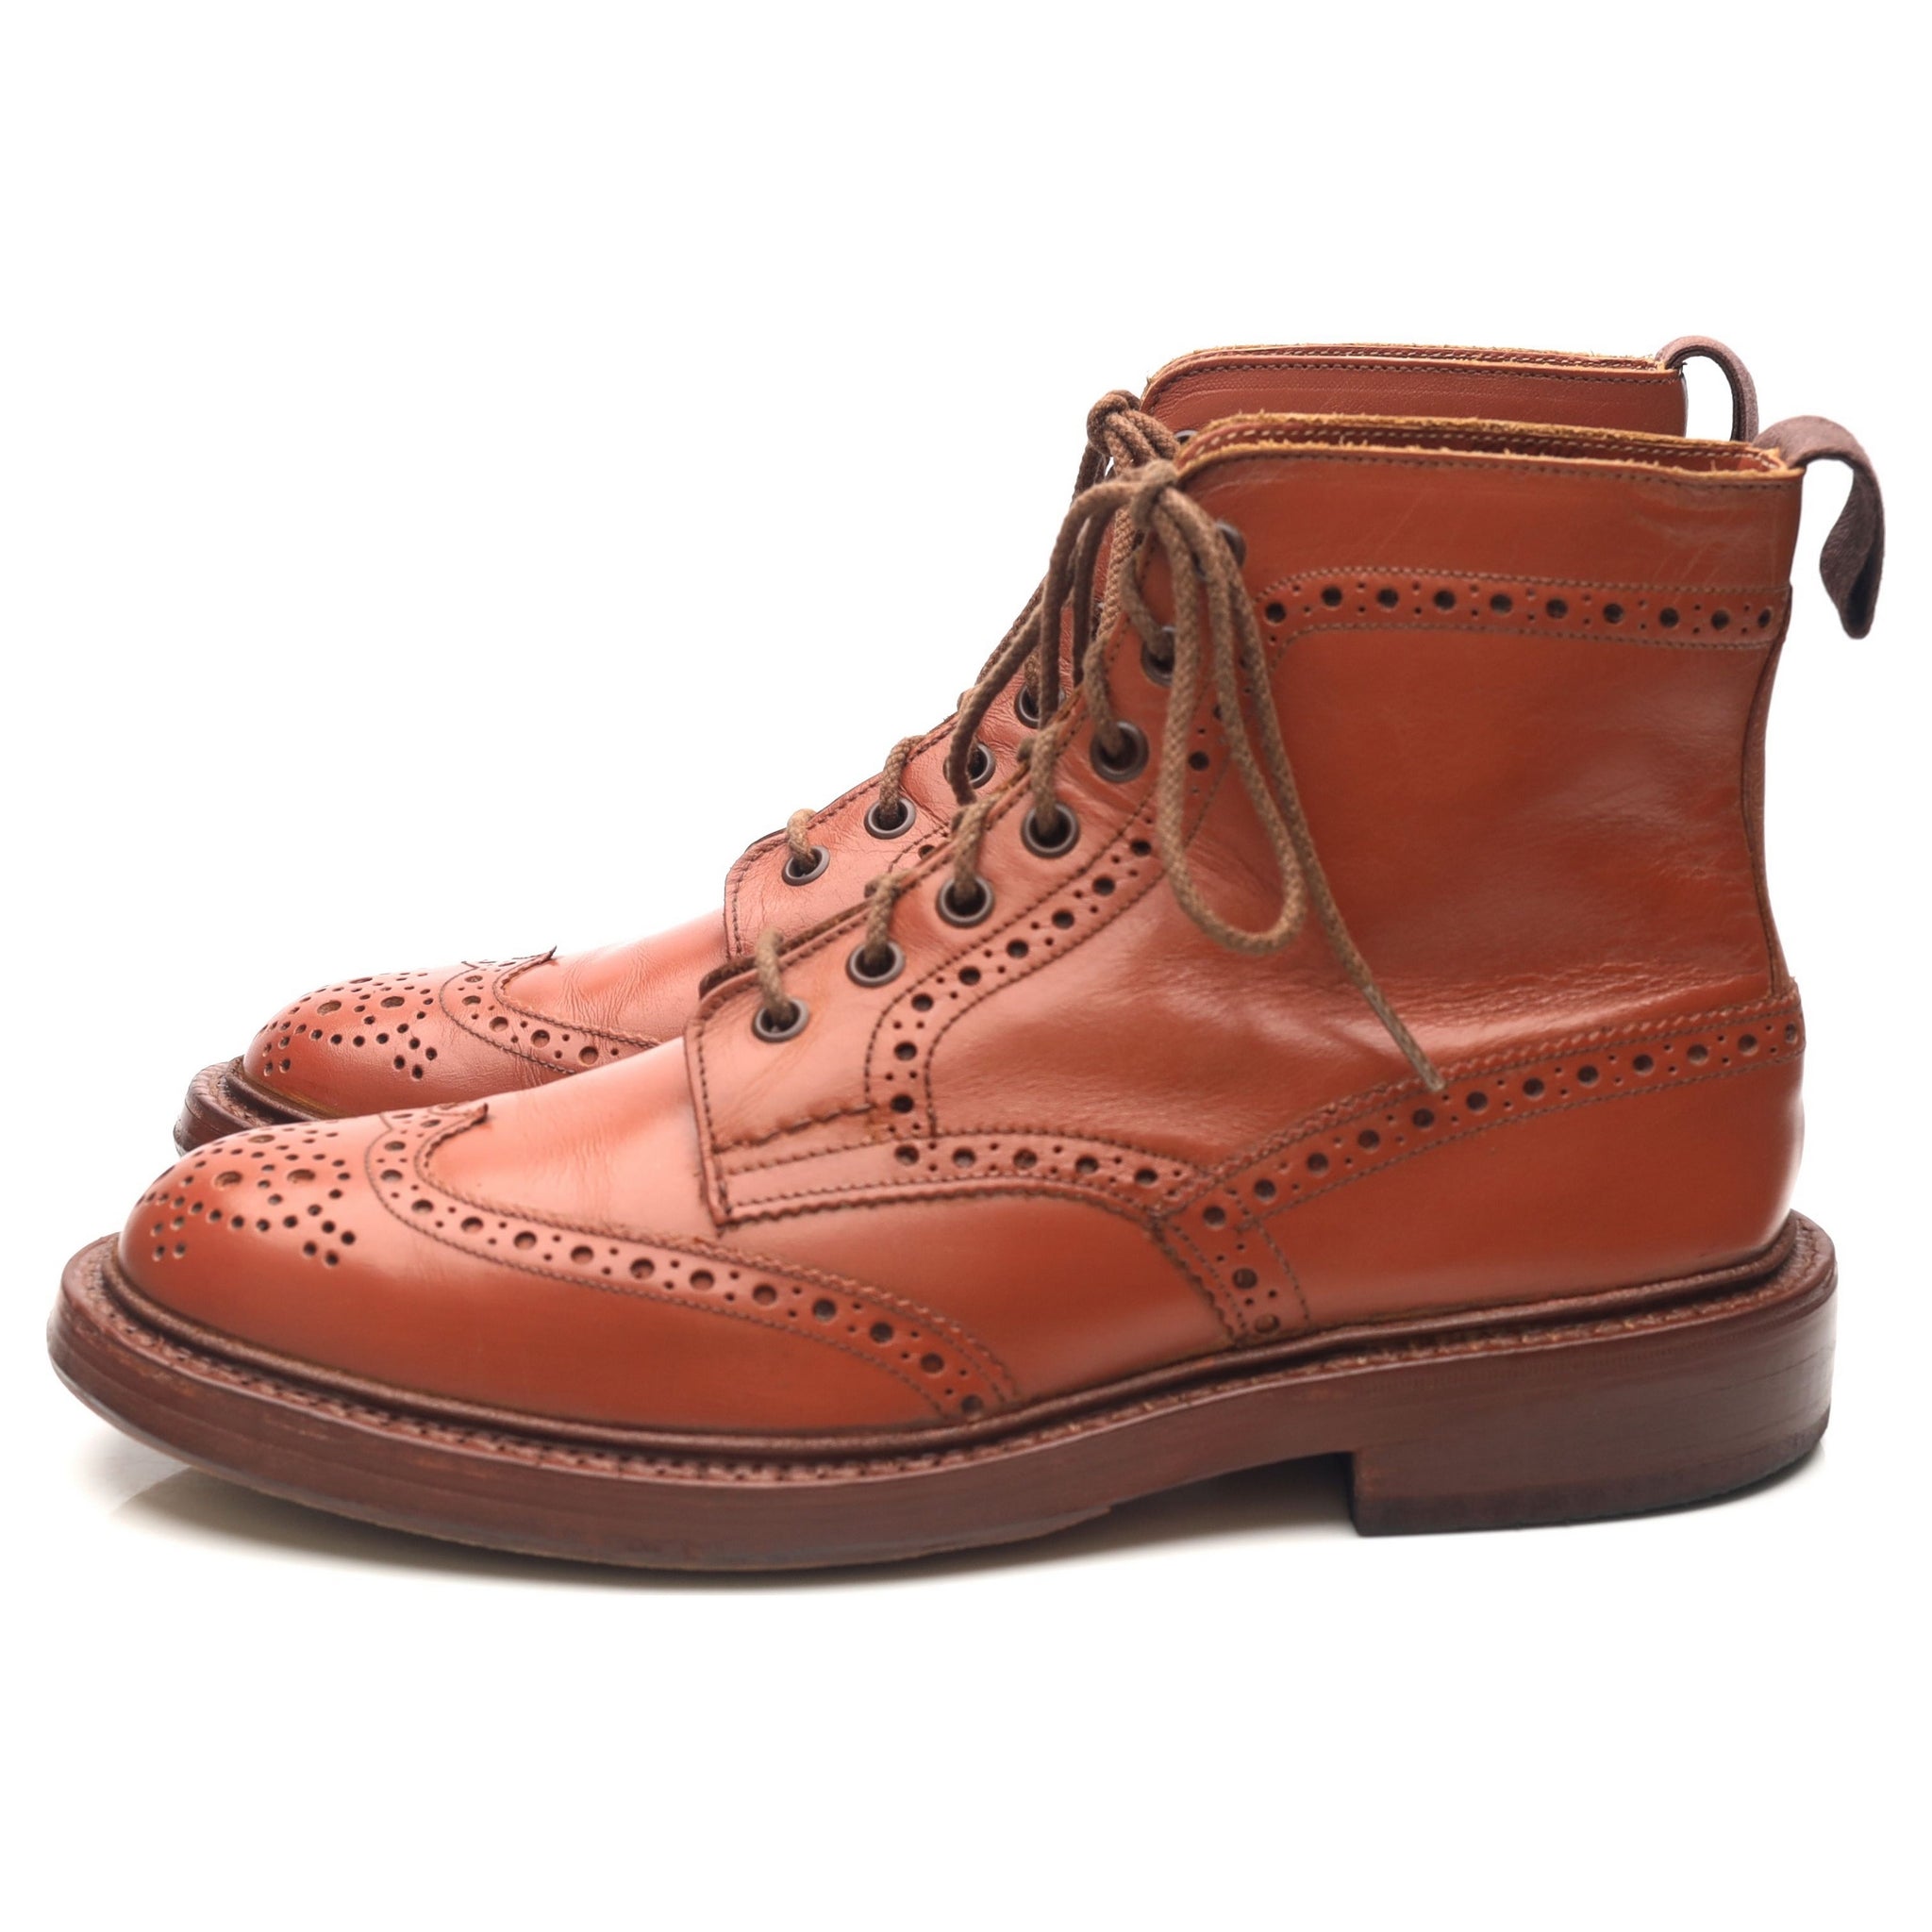 Malton' Tan Brown Leather Brogue Boots UK 7 - Abbot's Shoes